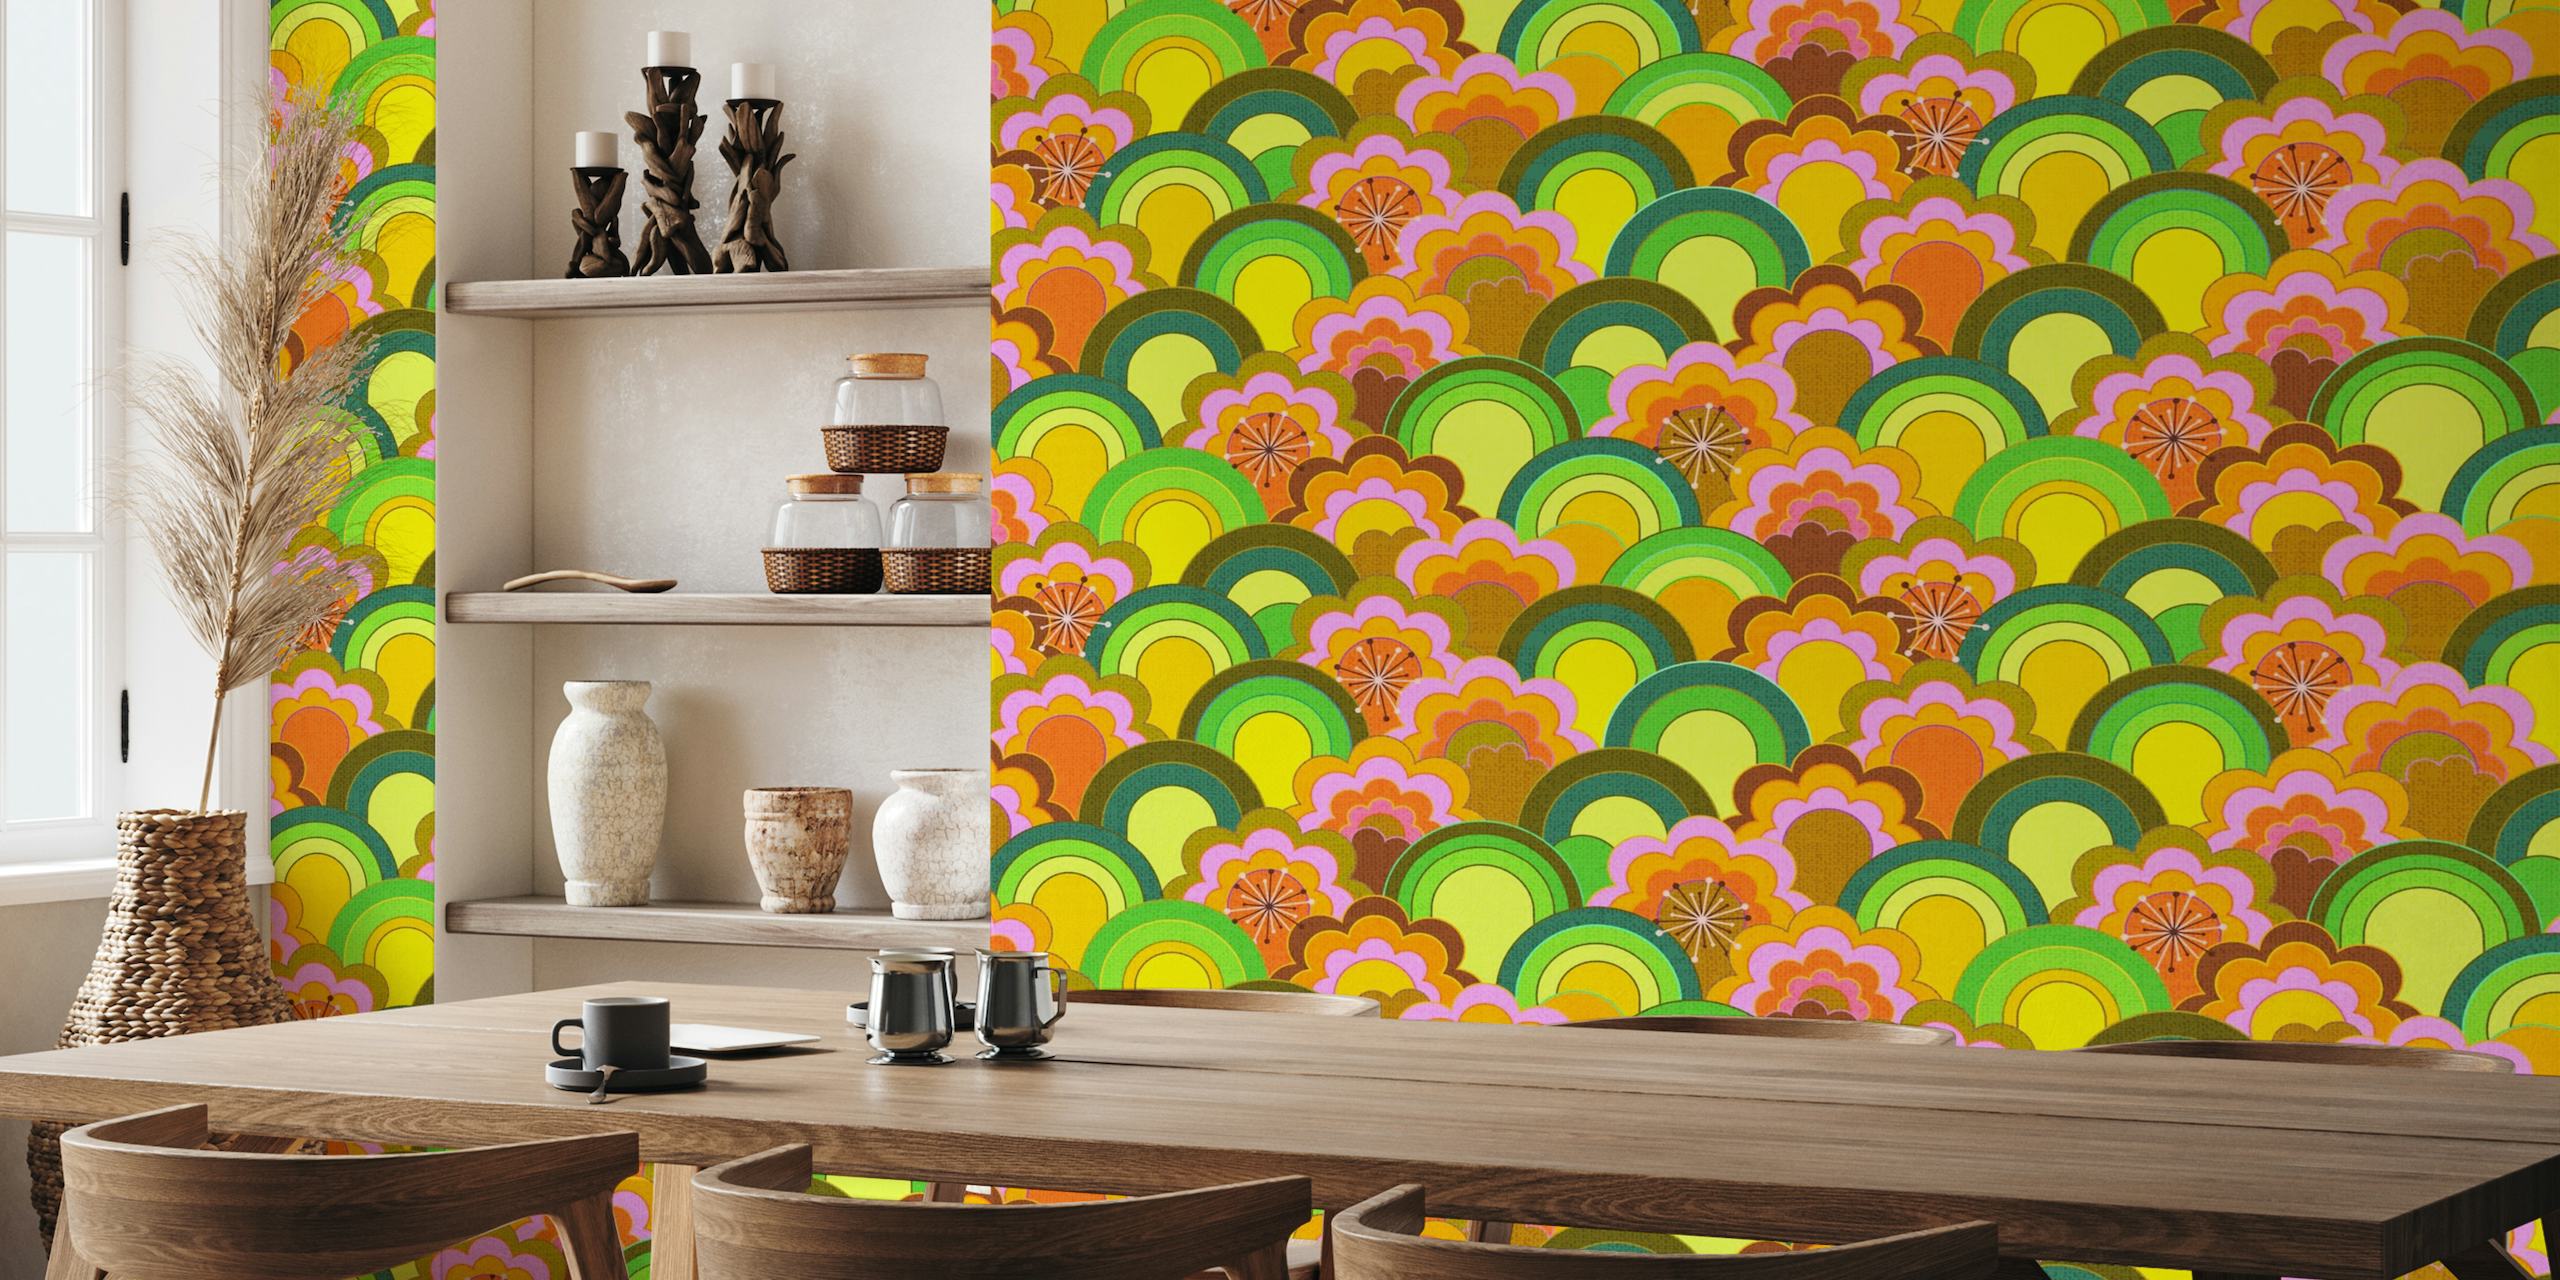 Colorful 70s-inspired rainbow flowers wall mural with a textured appearance